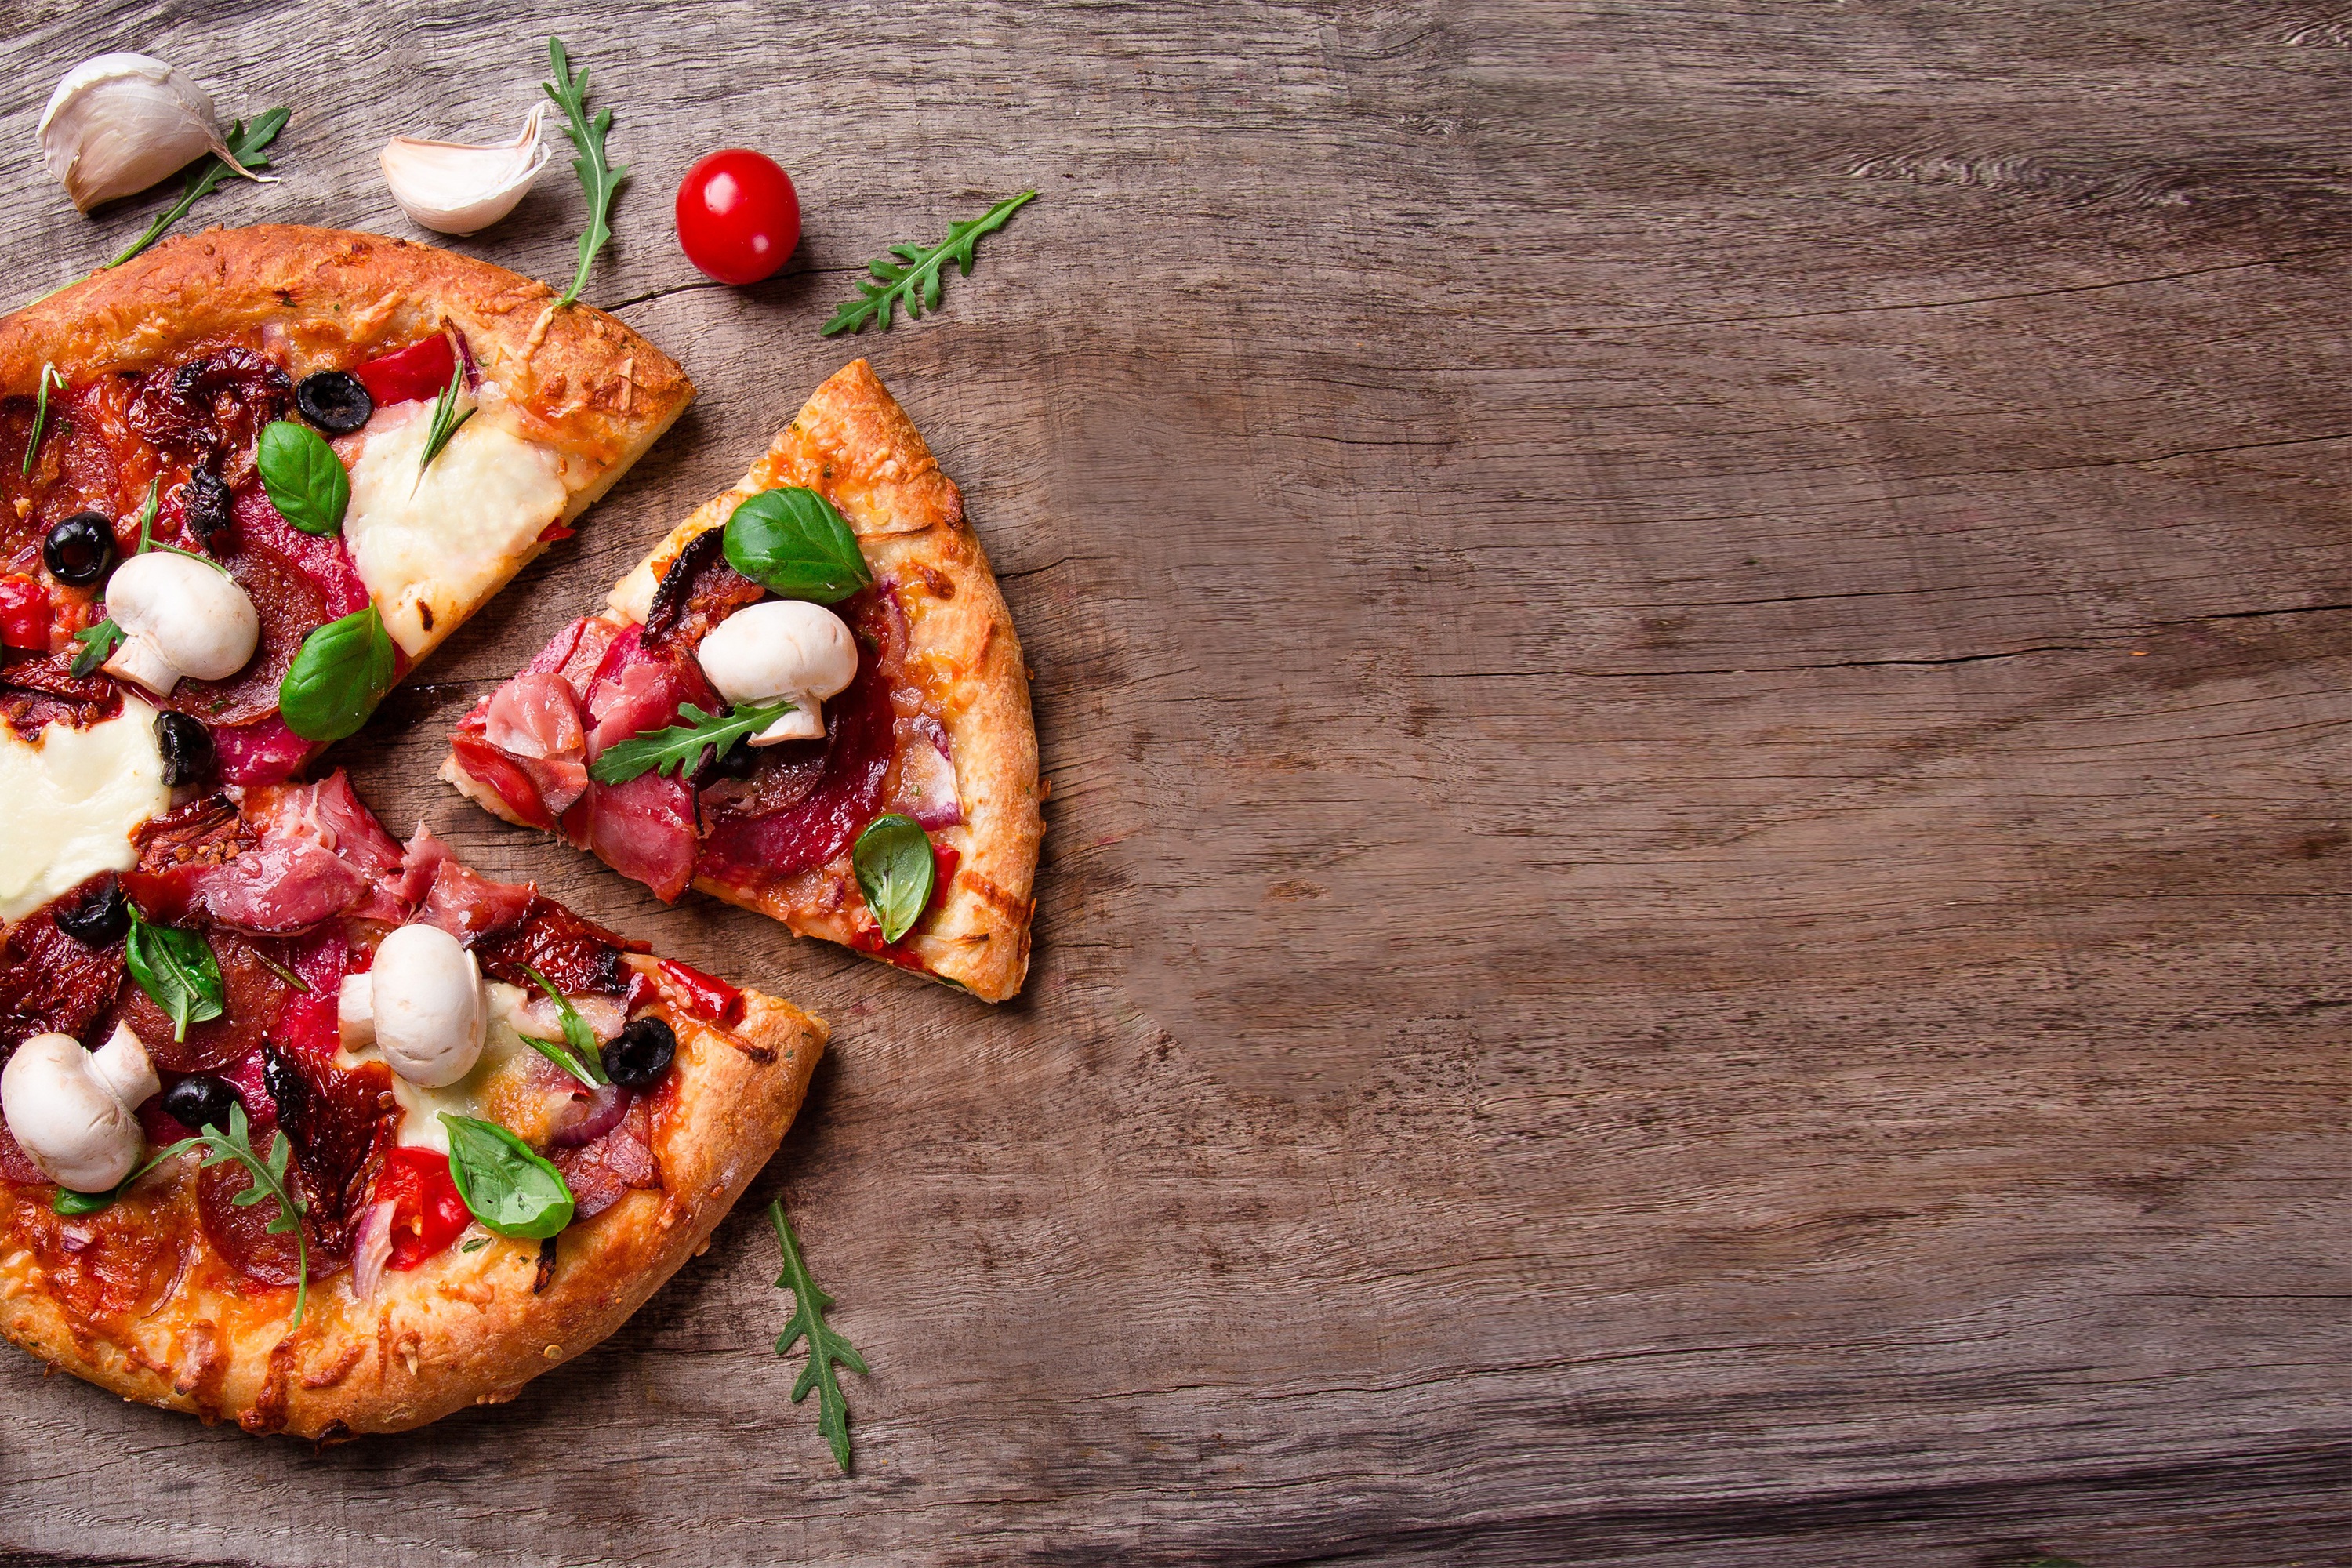 Pizza with Mushrooms, Olives and Meat on a Wooden Board by Bruno Marques Bru